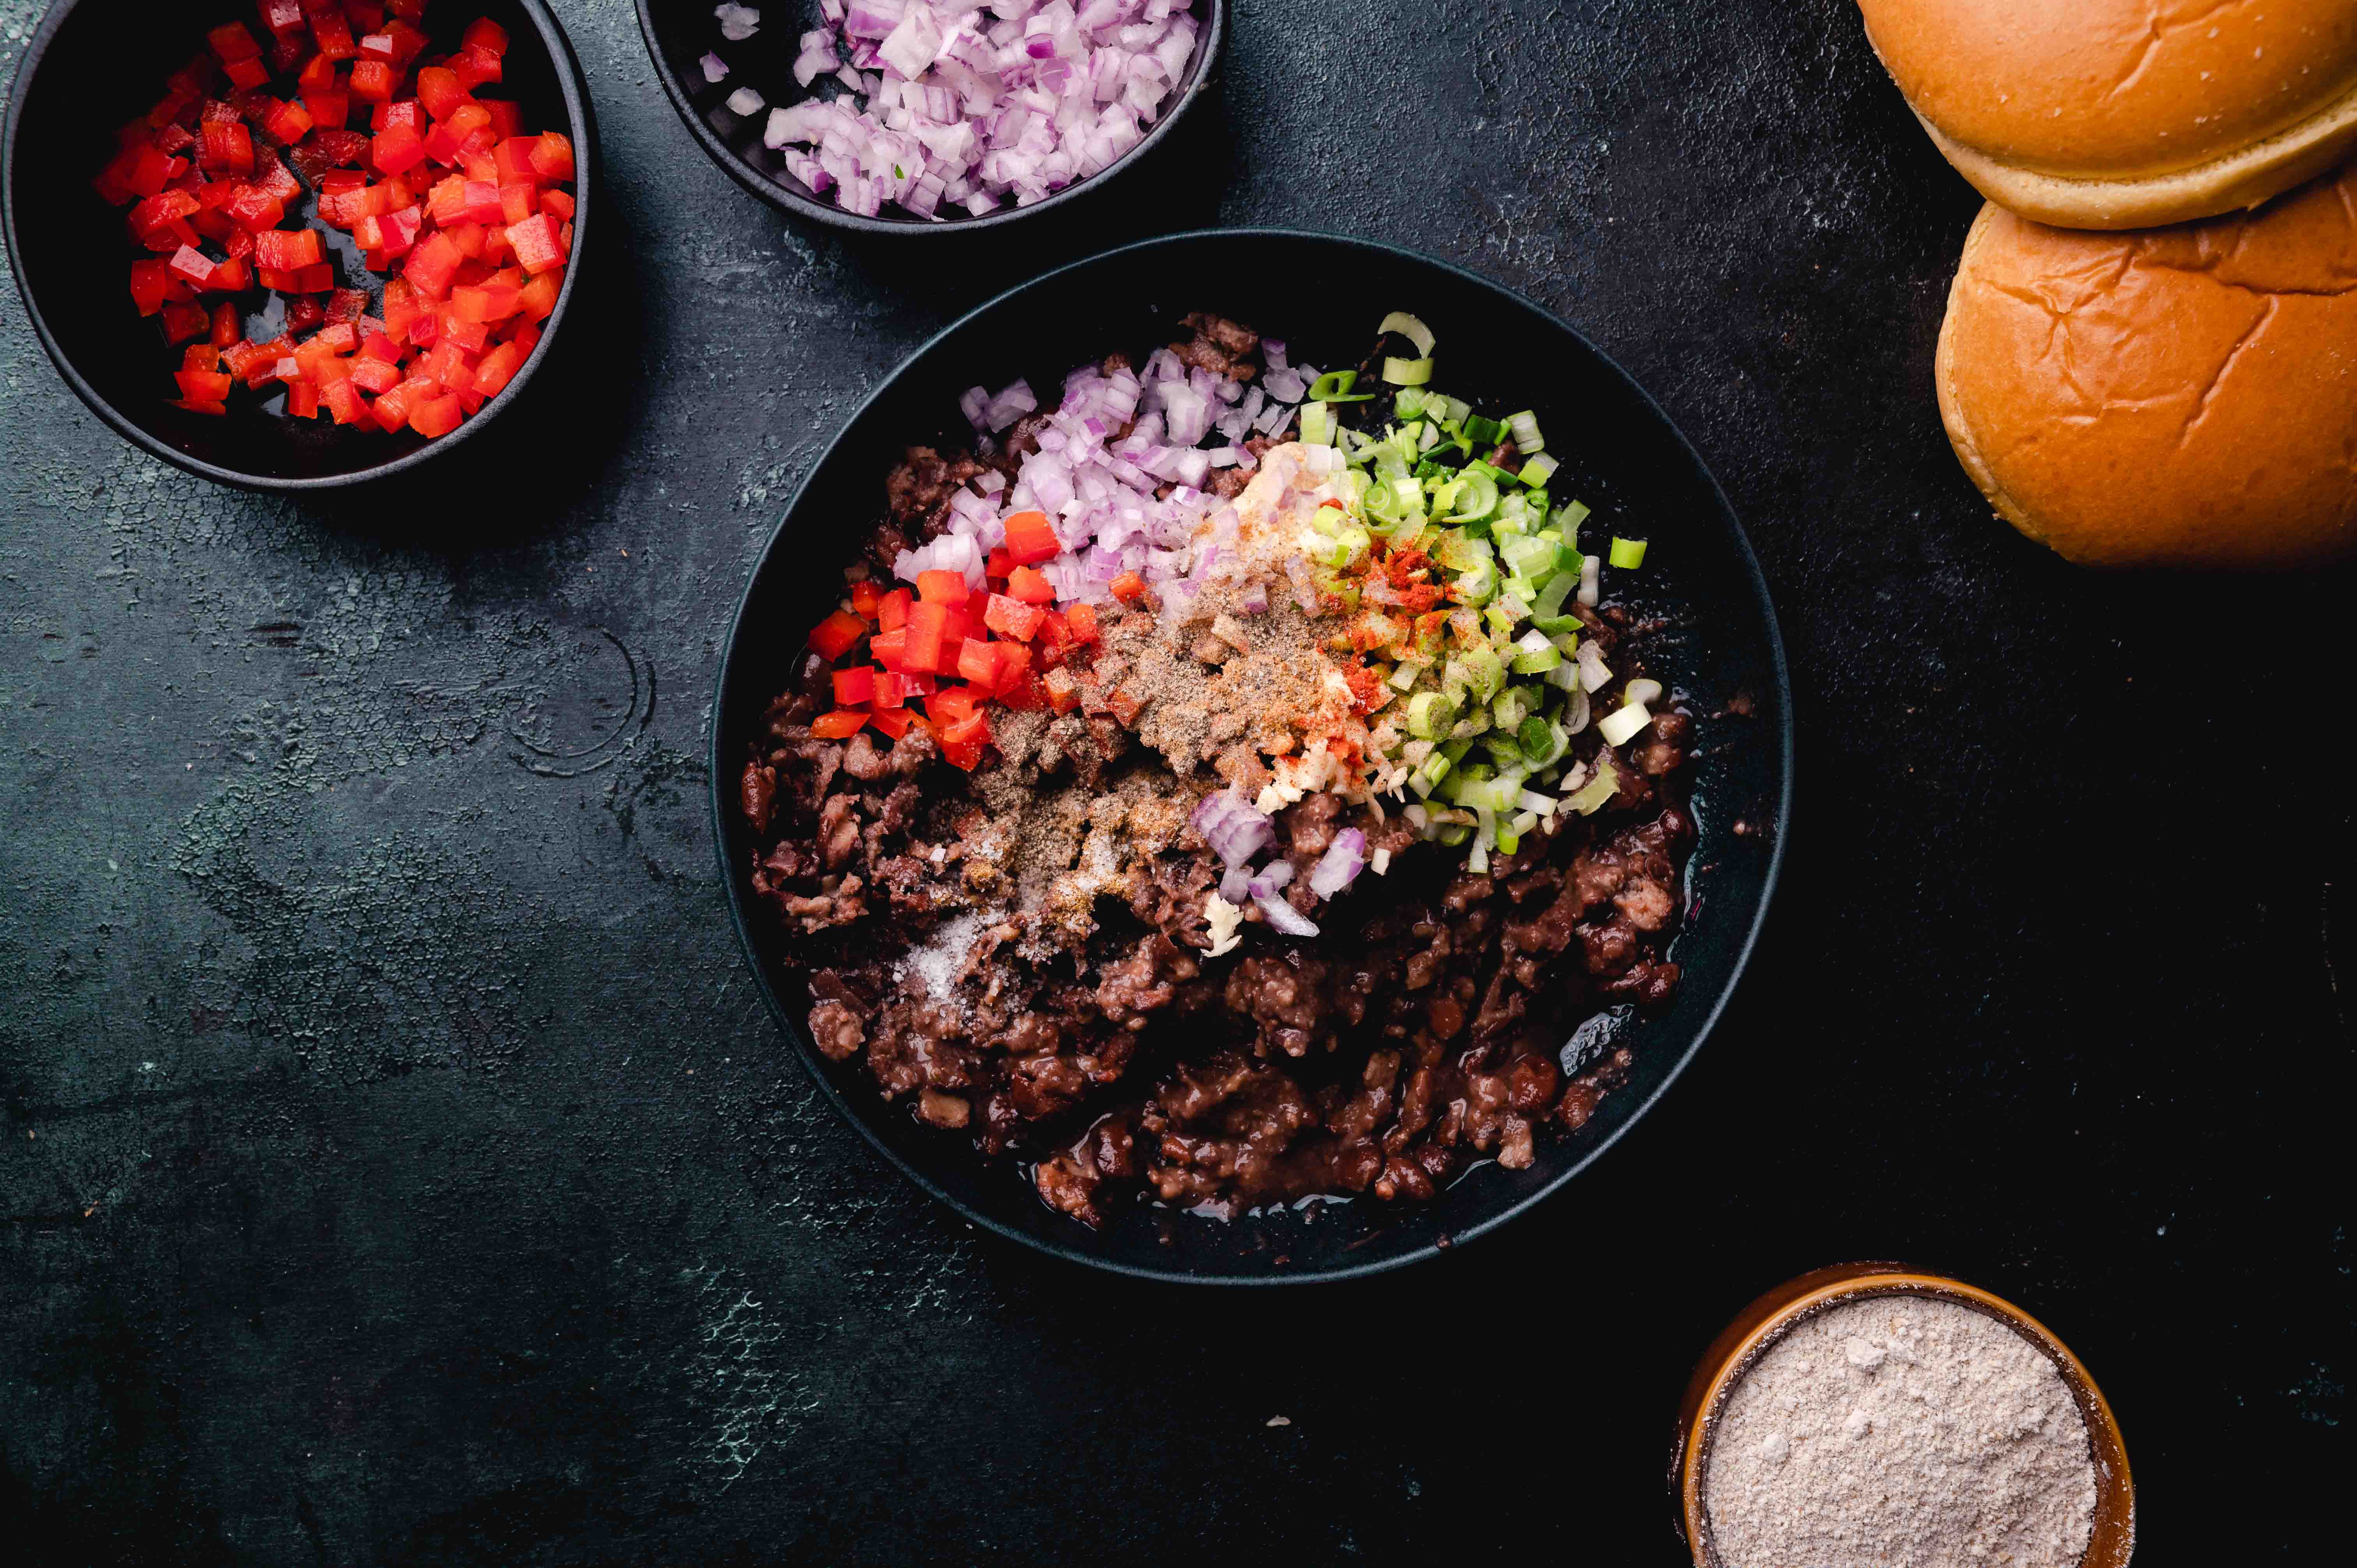 A black bowl filled with ground meat and diced vegetables on a dark table, surrounded by additional bowls of ingredients and burger buns.